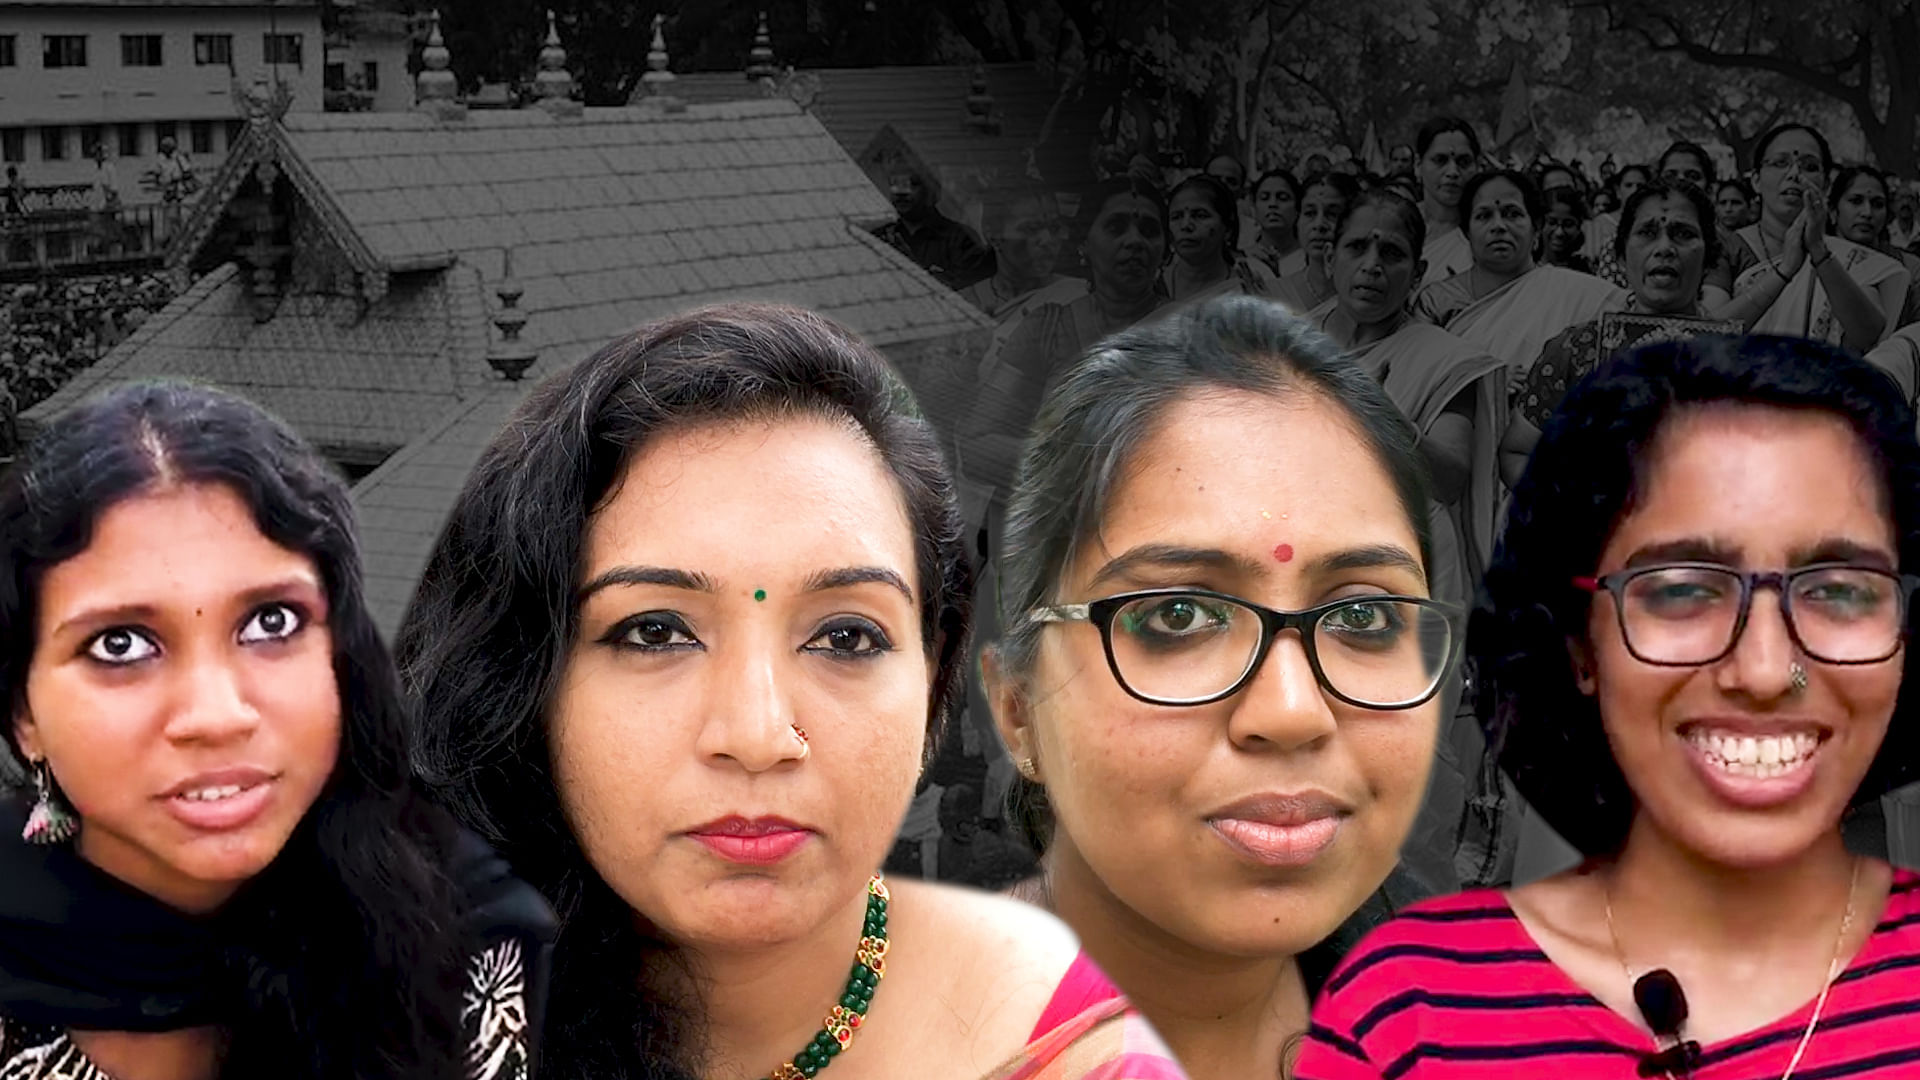 What do the women of Kerala think about women being allowed into the Sabarimala temple?